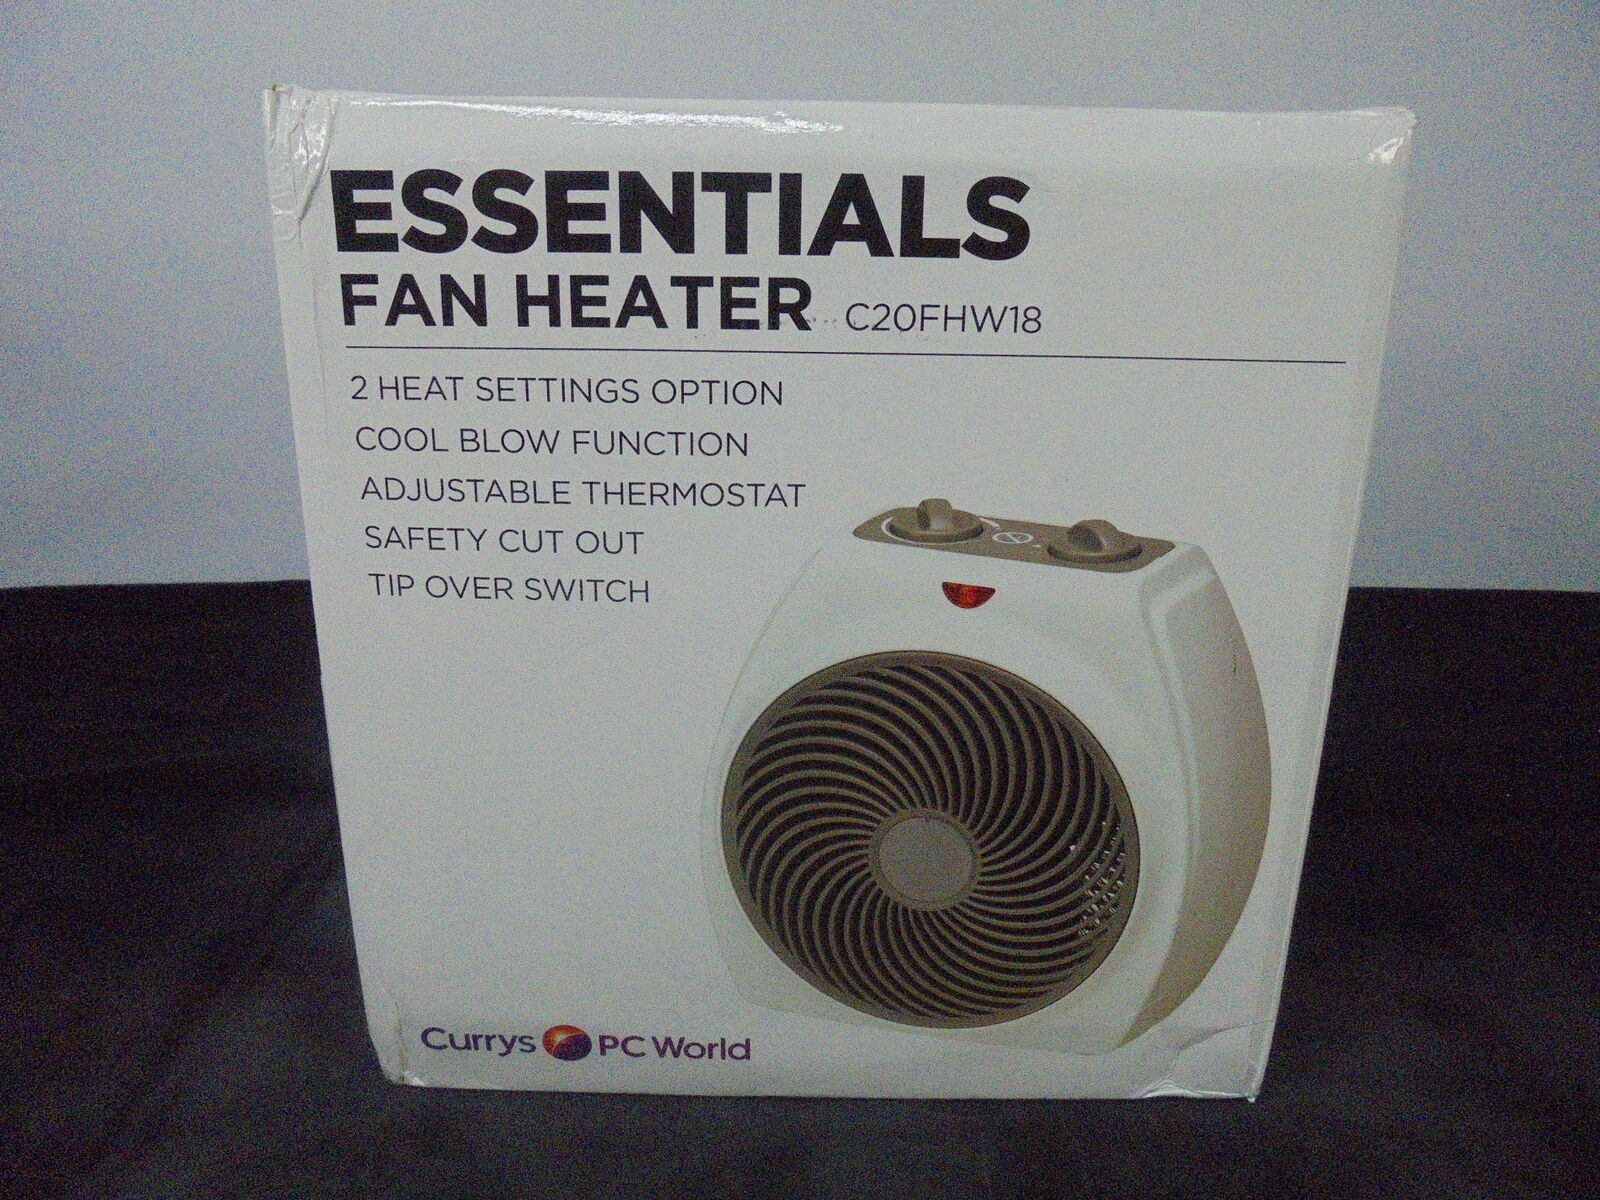 4 X Essentials C20fhw18 Portable Hot Cool Fan Heater White throughout proportions 1600 X 1200